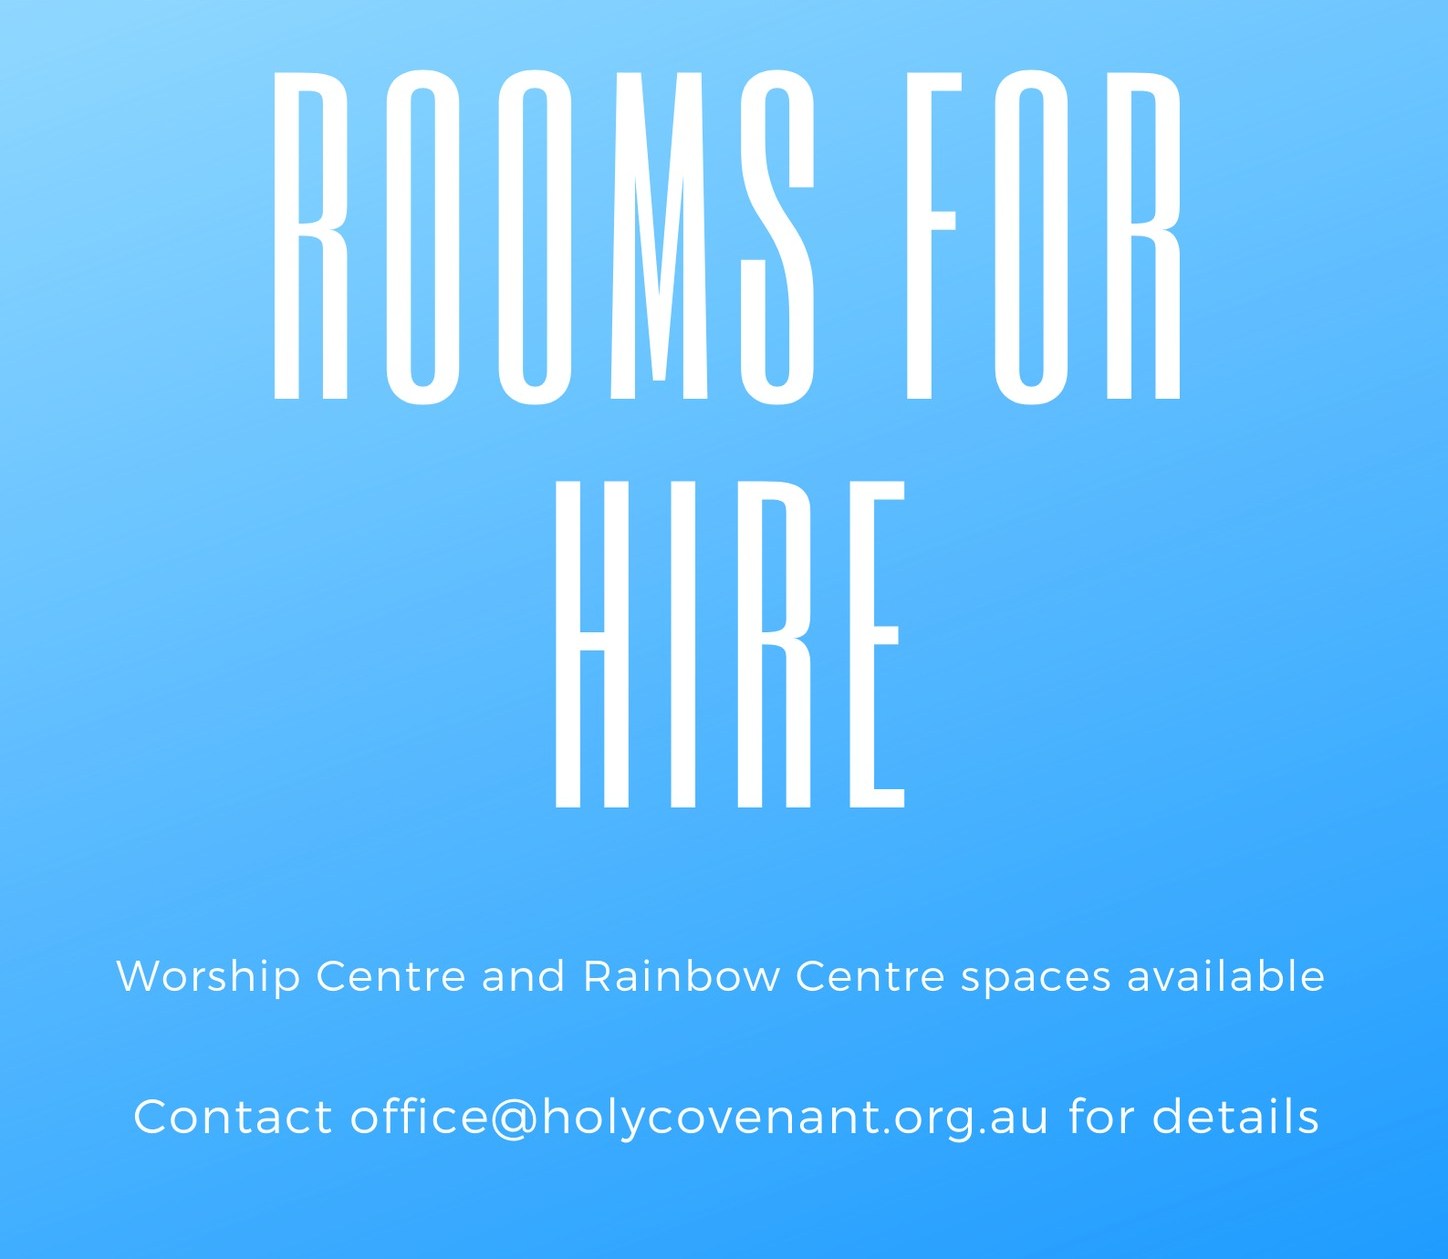 Rooms For Hire. Worship Centre and Rainbow Centre spaces available. Contact office@holycovenant.org.au for details